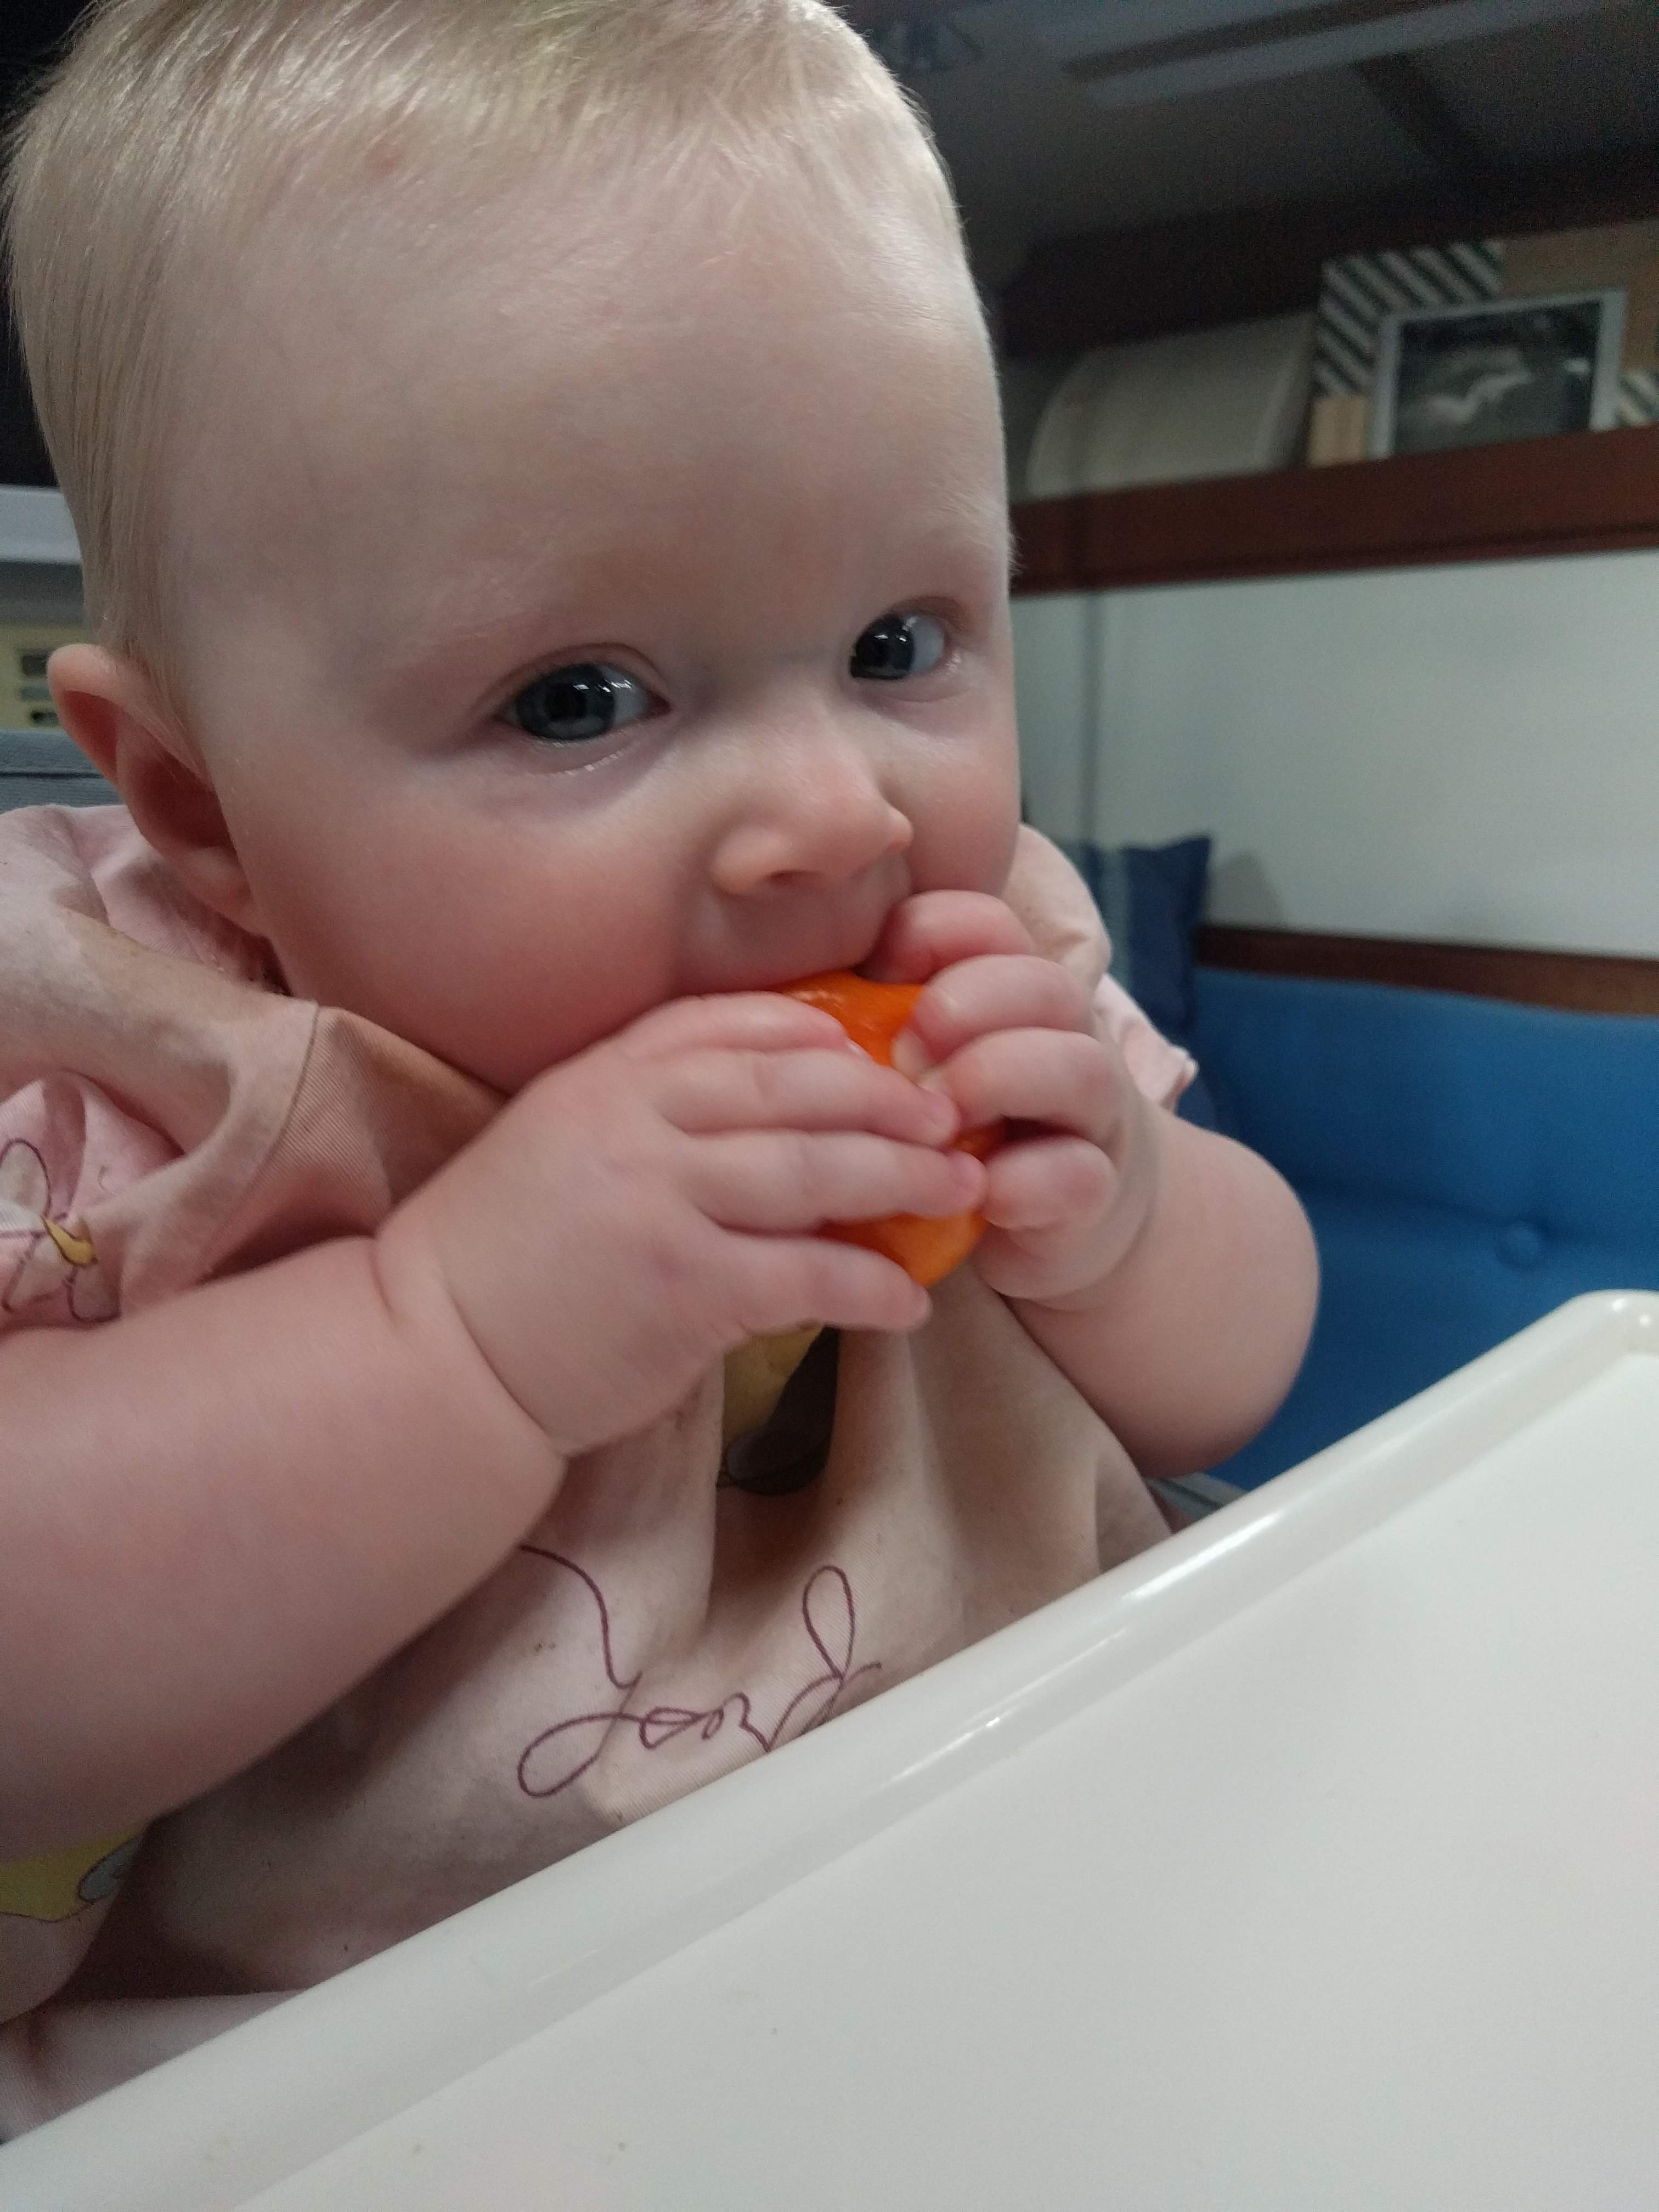 Naomi gumming on a clementine